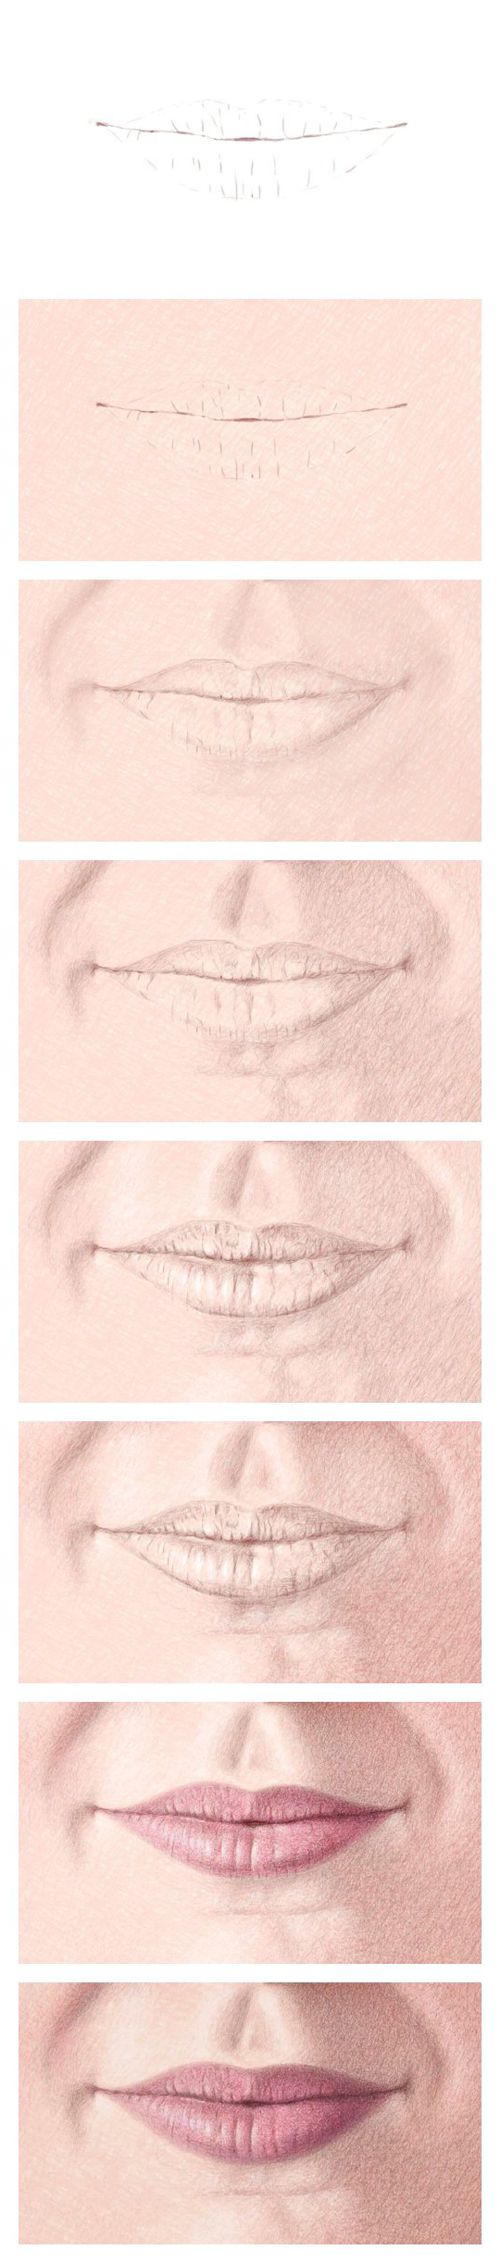 Color Pencil Portraits - How to Draw the Mouth: Steps 1-8